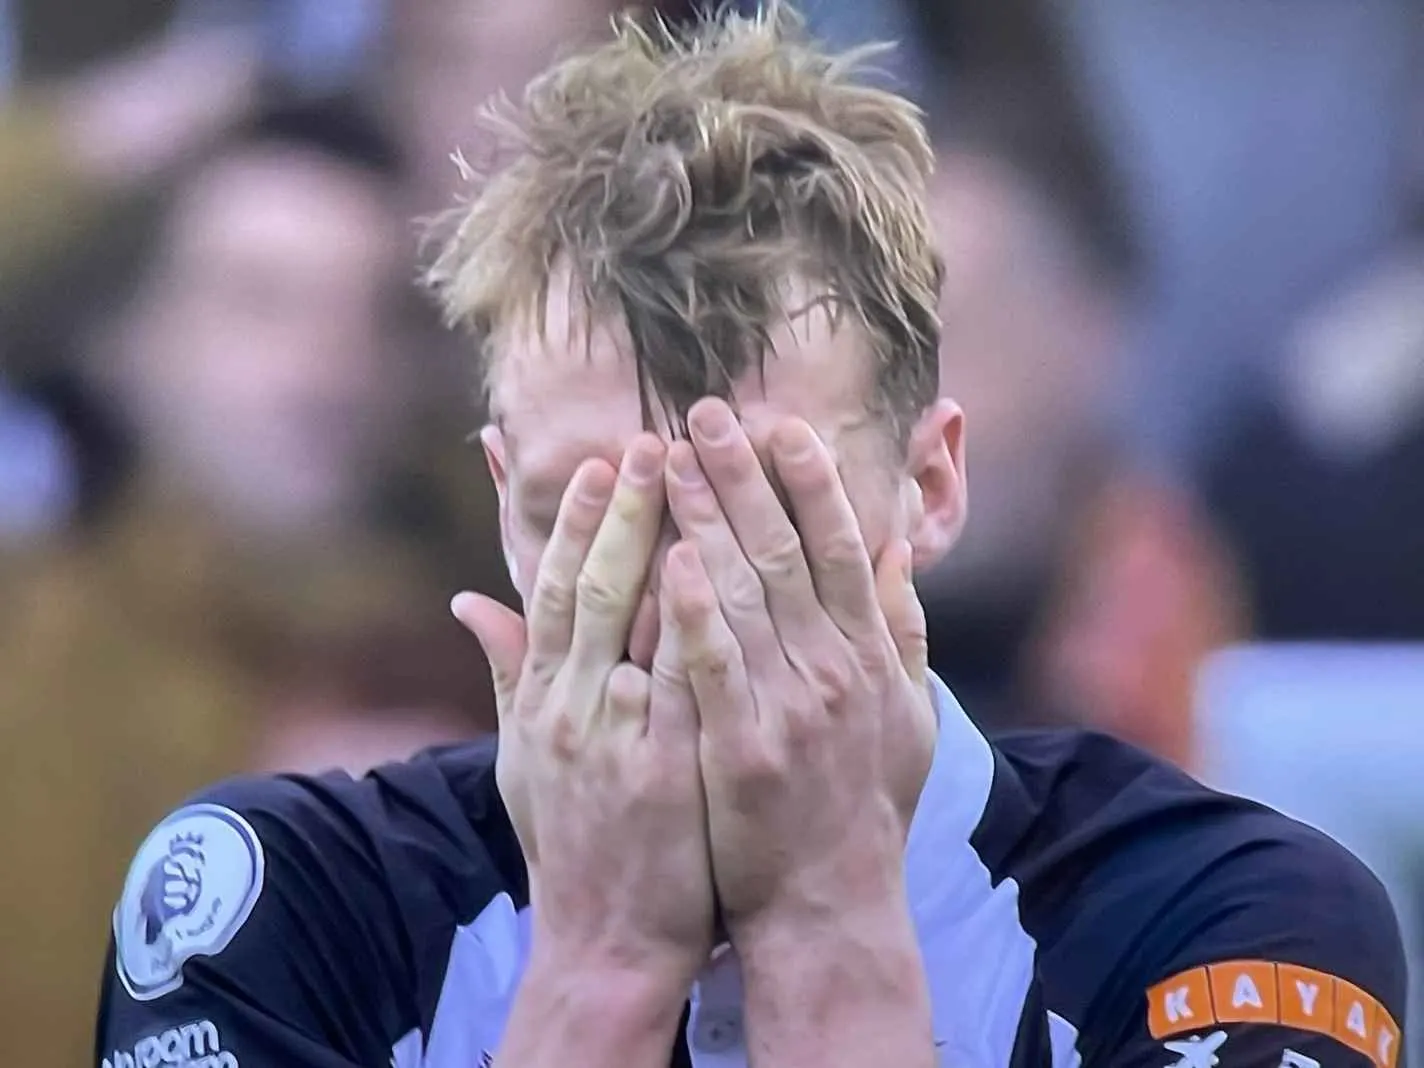 Newcastle defender Dan Burn is missing a whole finger due to horrific accident when he was 13